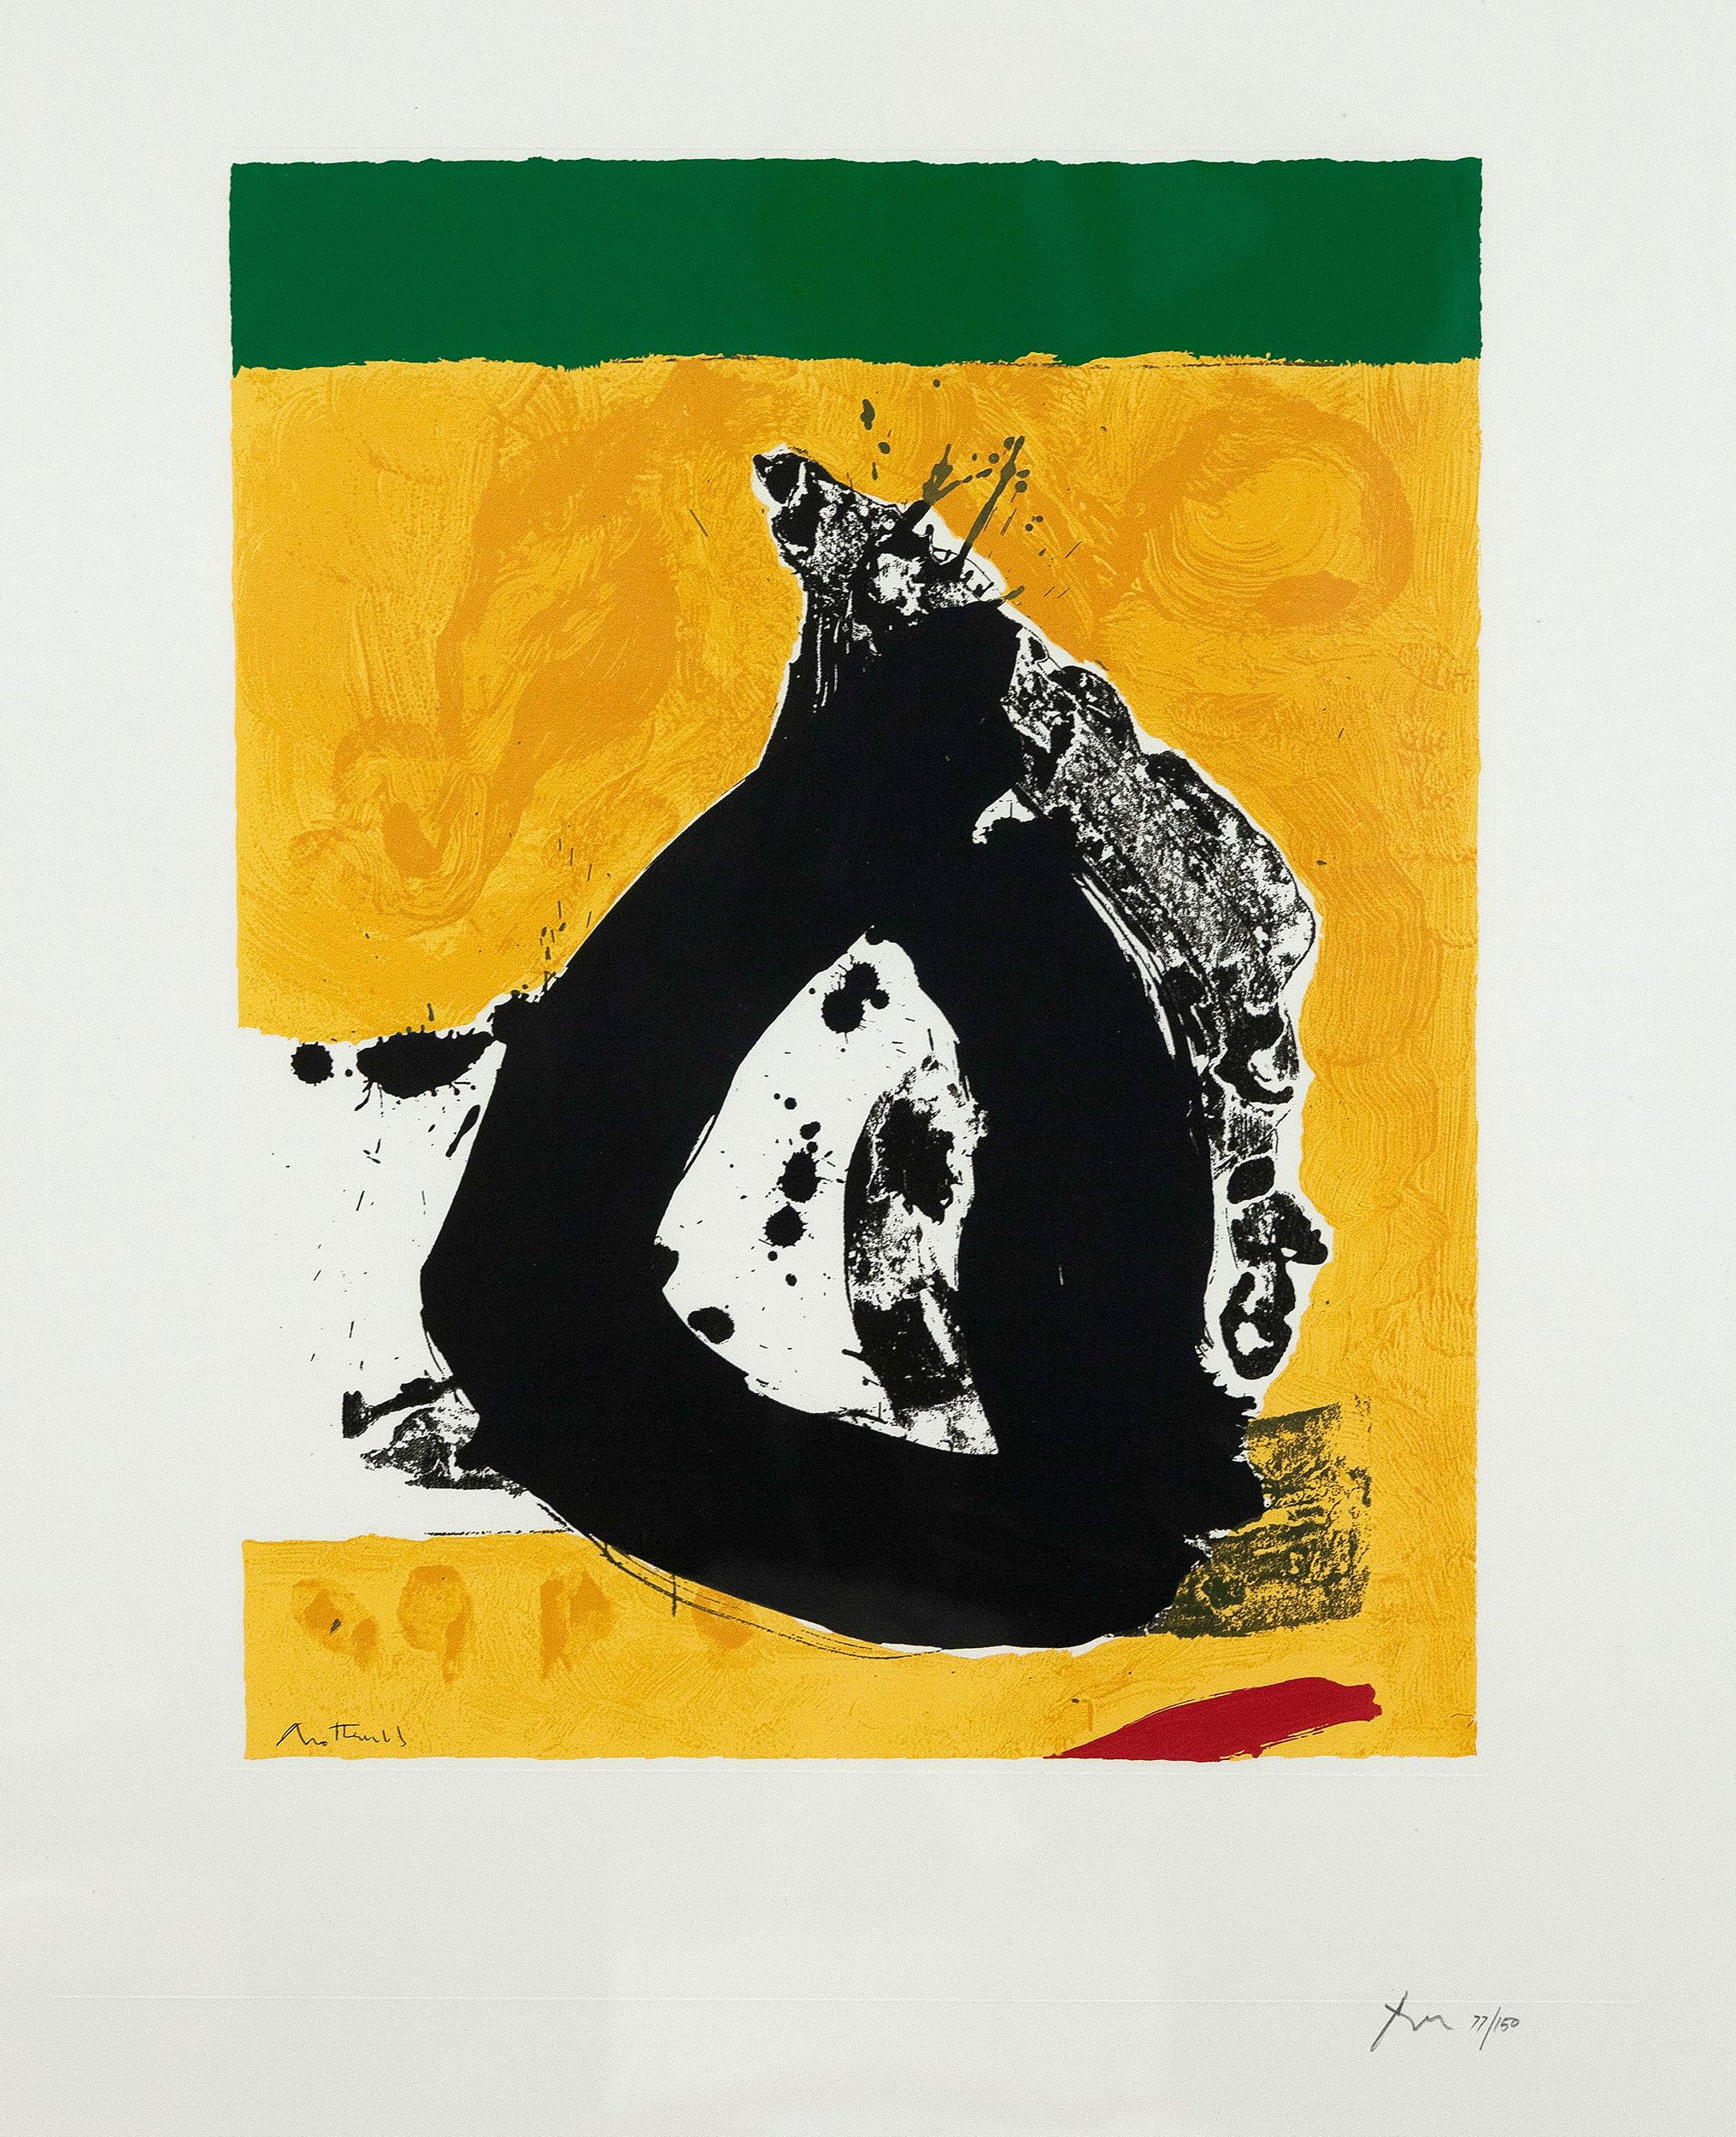 Robert Motherwell (1915-1991), alongside Jackson Pollock, Mark Rothko, and Willem de Kooning, made up the quartet of abstract painters that radically defined Modern painting in America and established New York City as the new center of the art